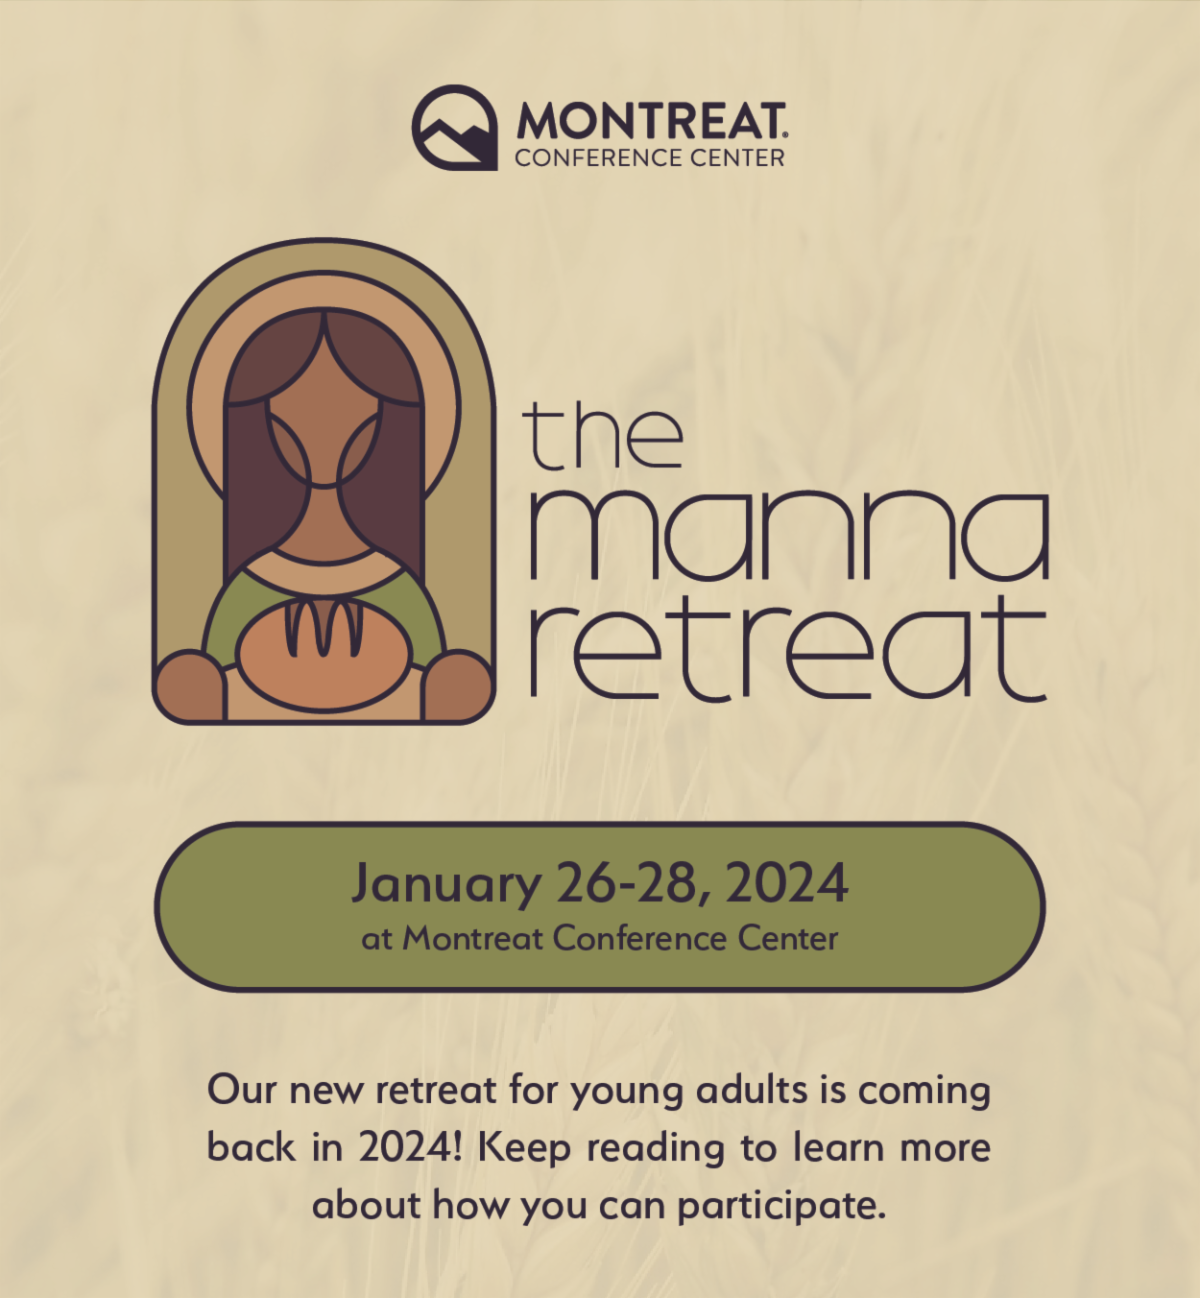 The Manna Retreat: January 26-28, 2024 at Montreat Conference Center - Our new retreat for young adults is coming back in 2024! Keep reading to learn more about how you can participate.